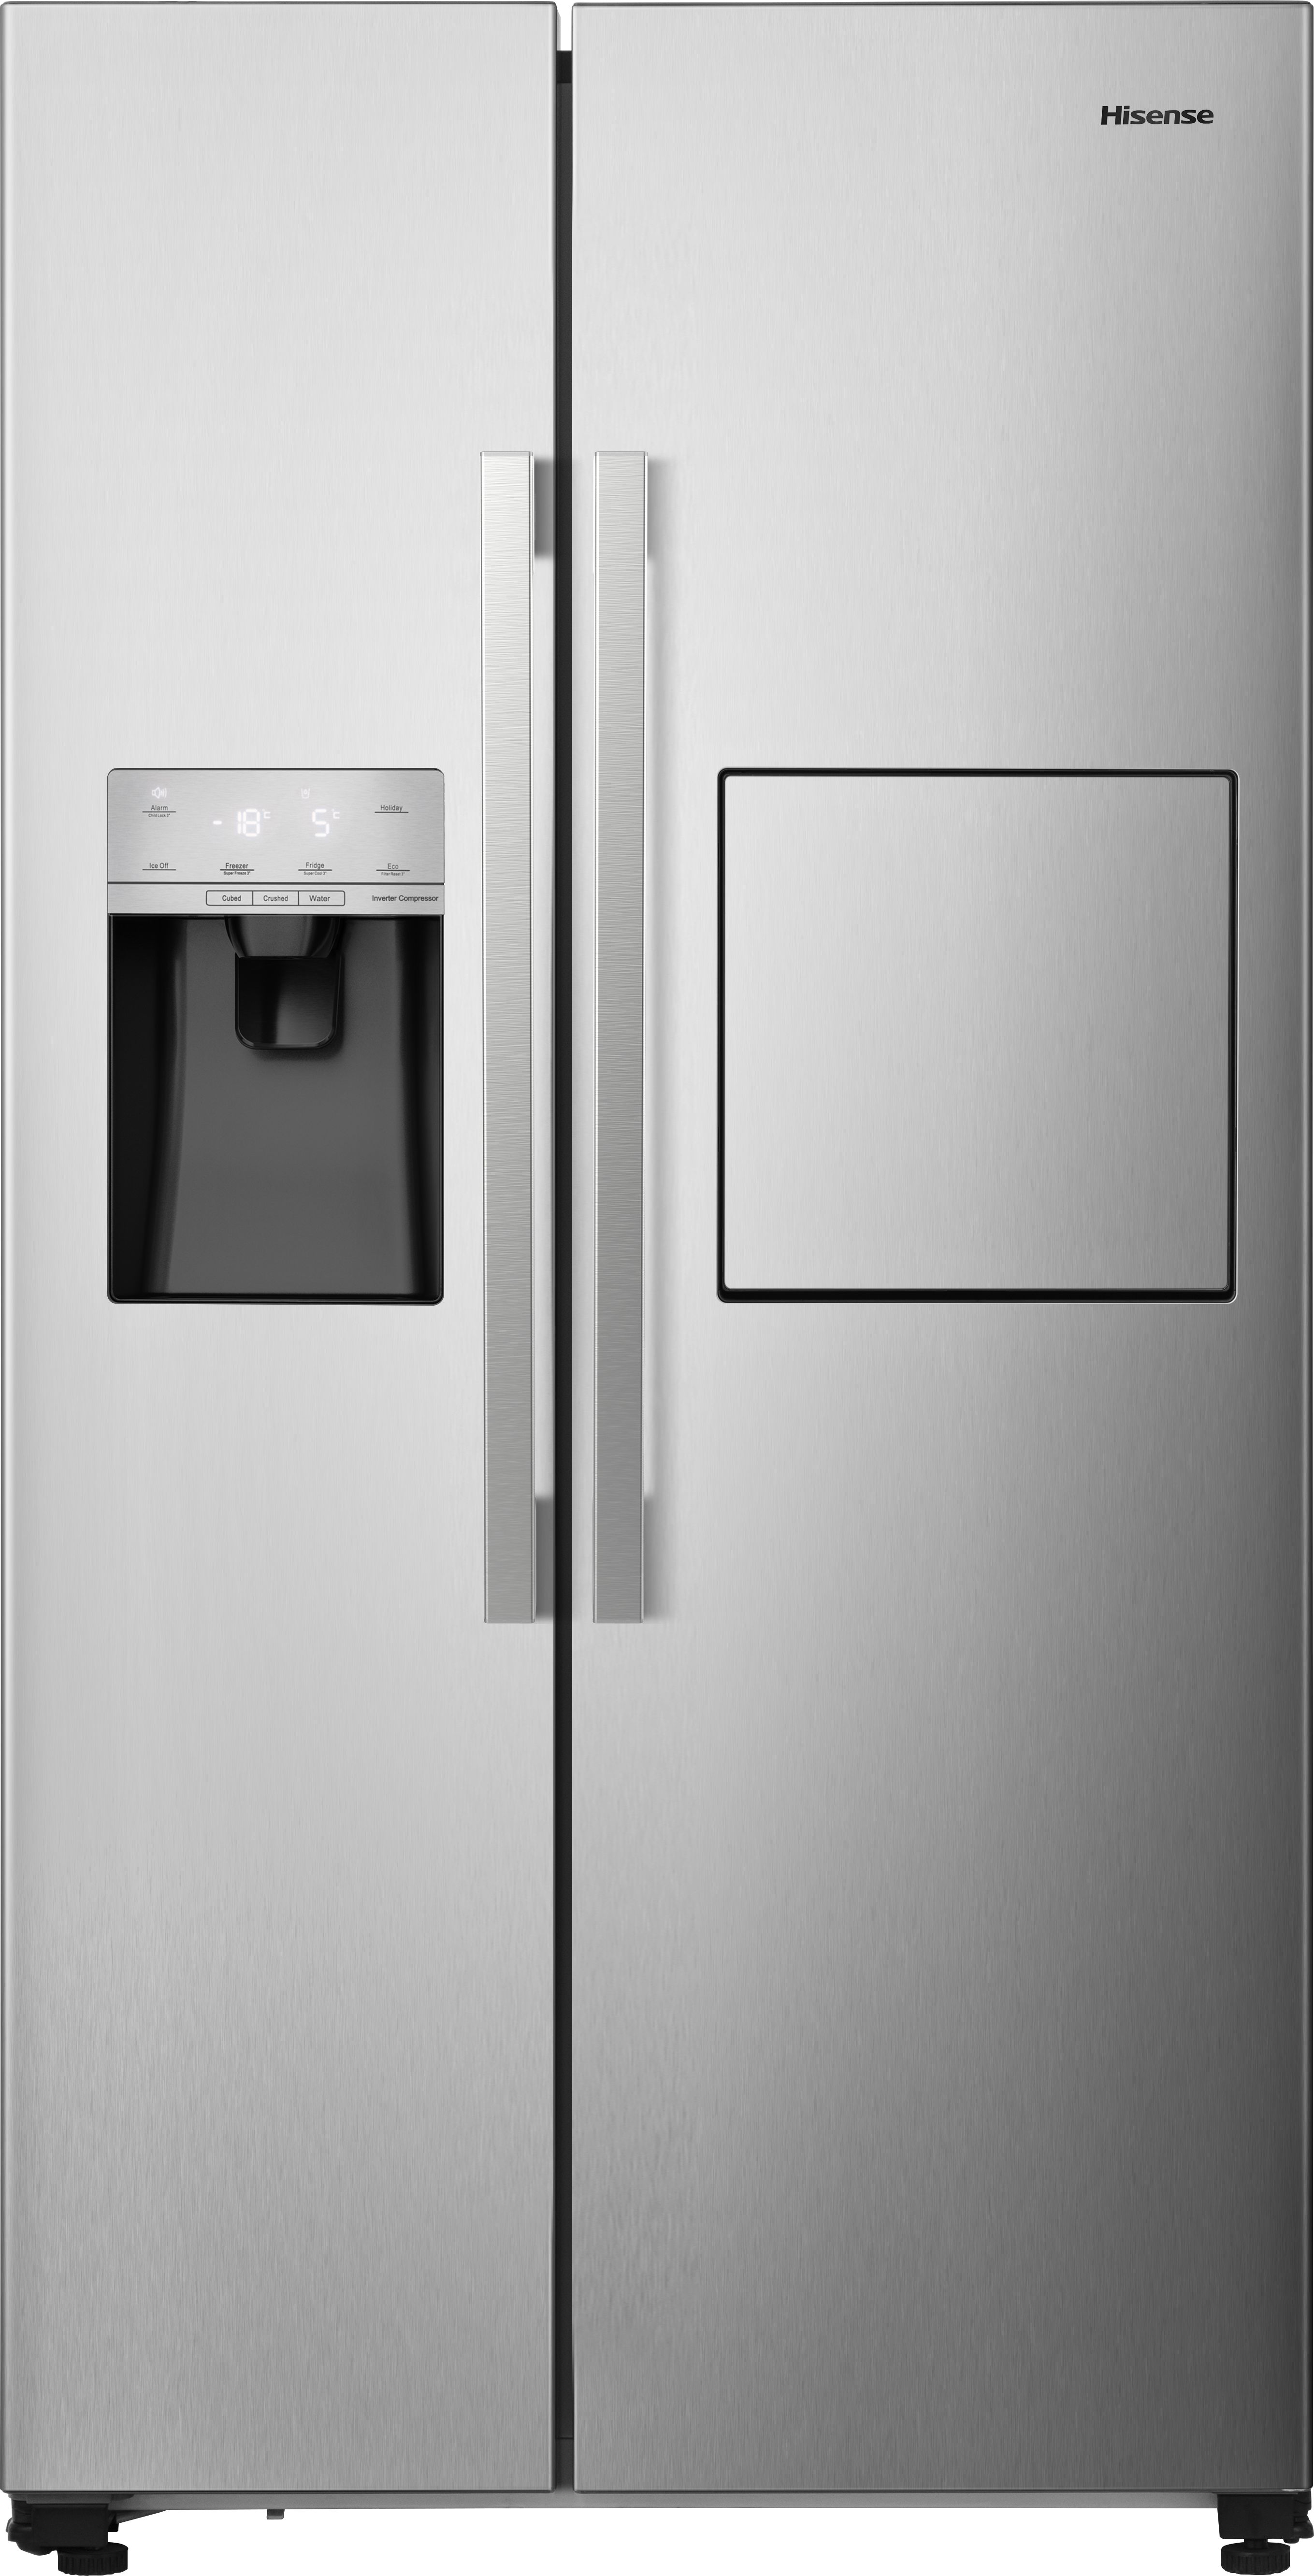 Hisense RS694N4BCE Plumbed Total No Frost American Fridge Freezer - Stainless Steel - E Rated, Stainless Steel